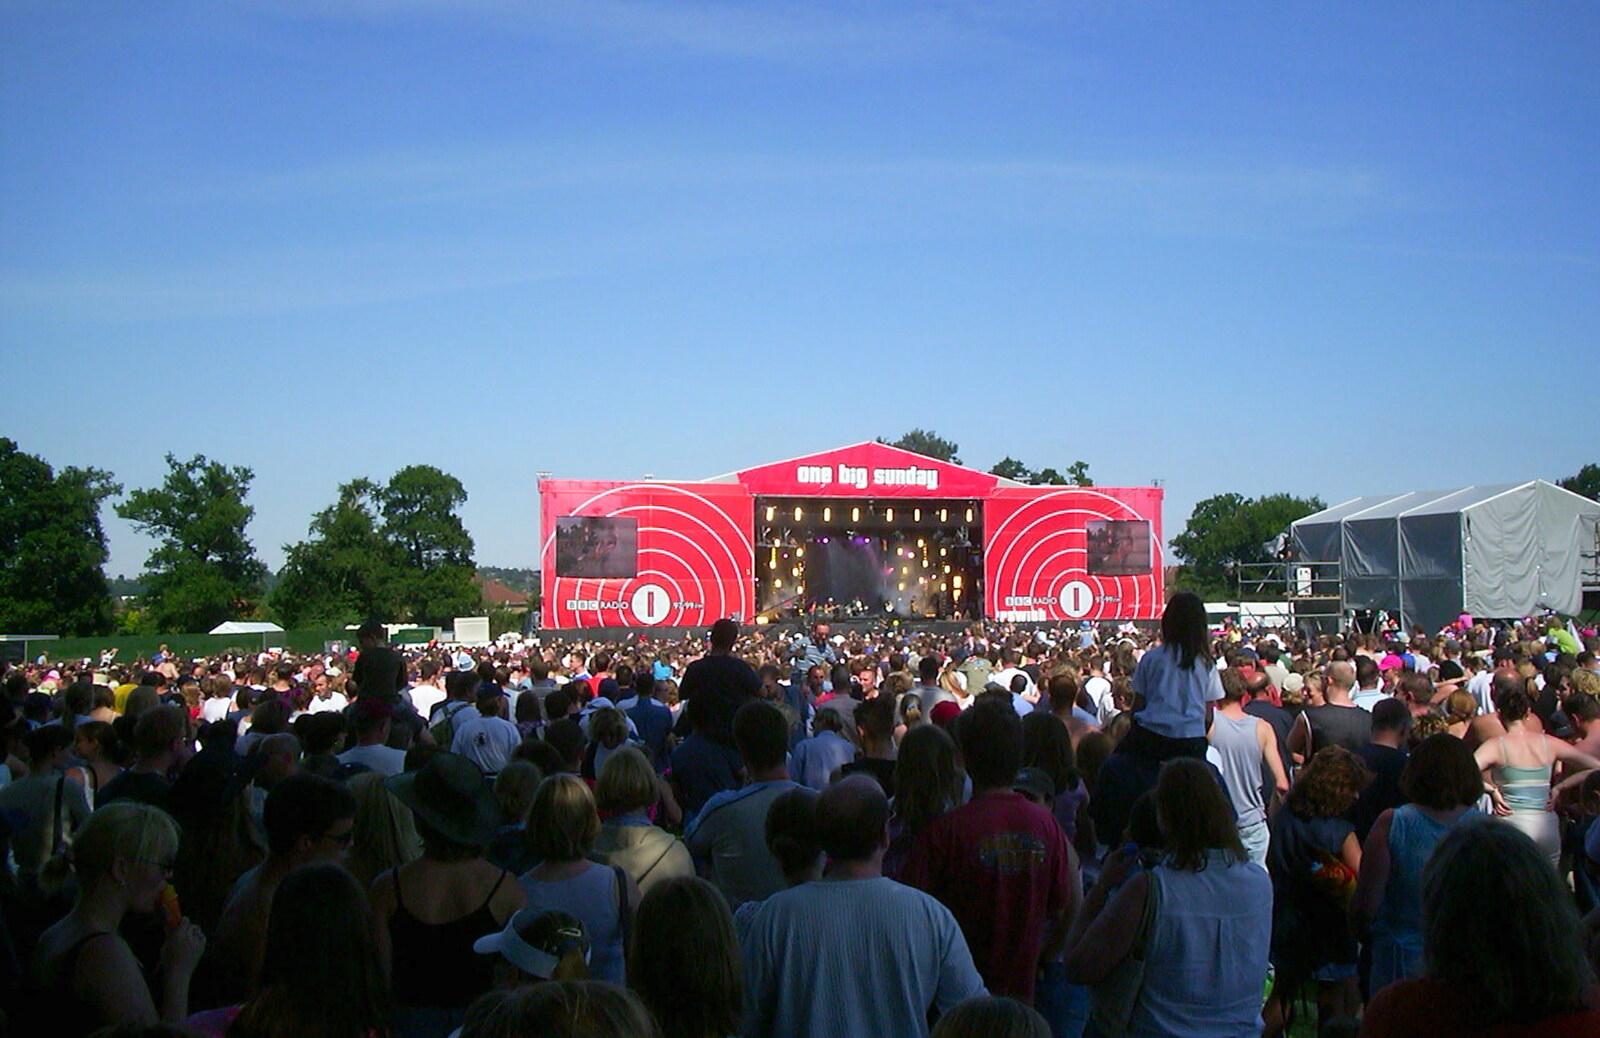 Possibly Kocheen on stage from Radio 1's One Big Sunday, Chantry Park, Ipswich - 14th July 2002